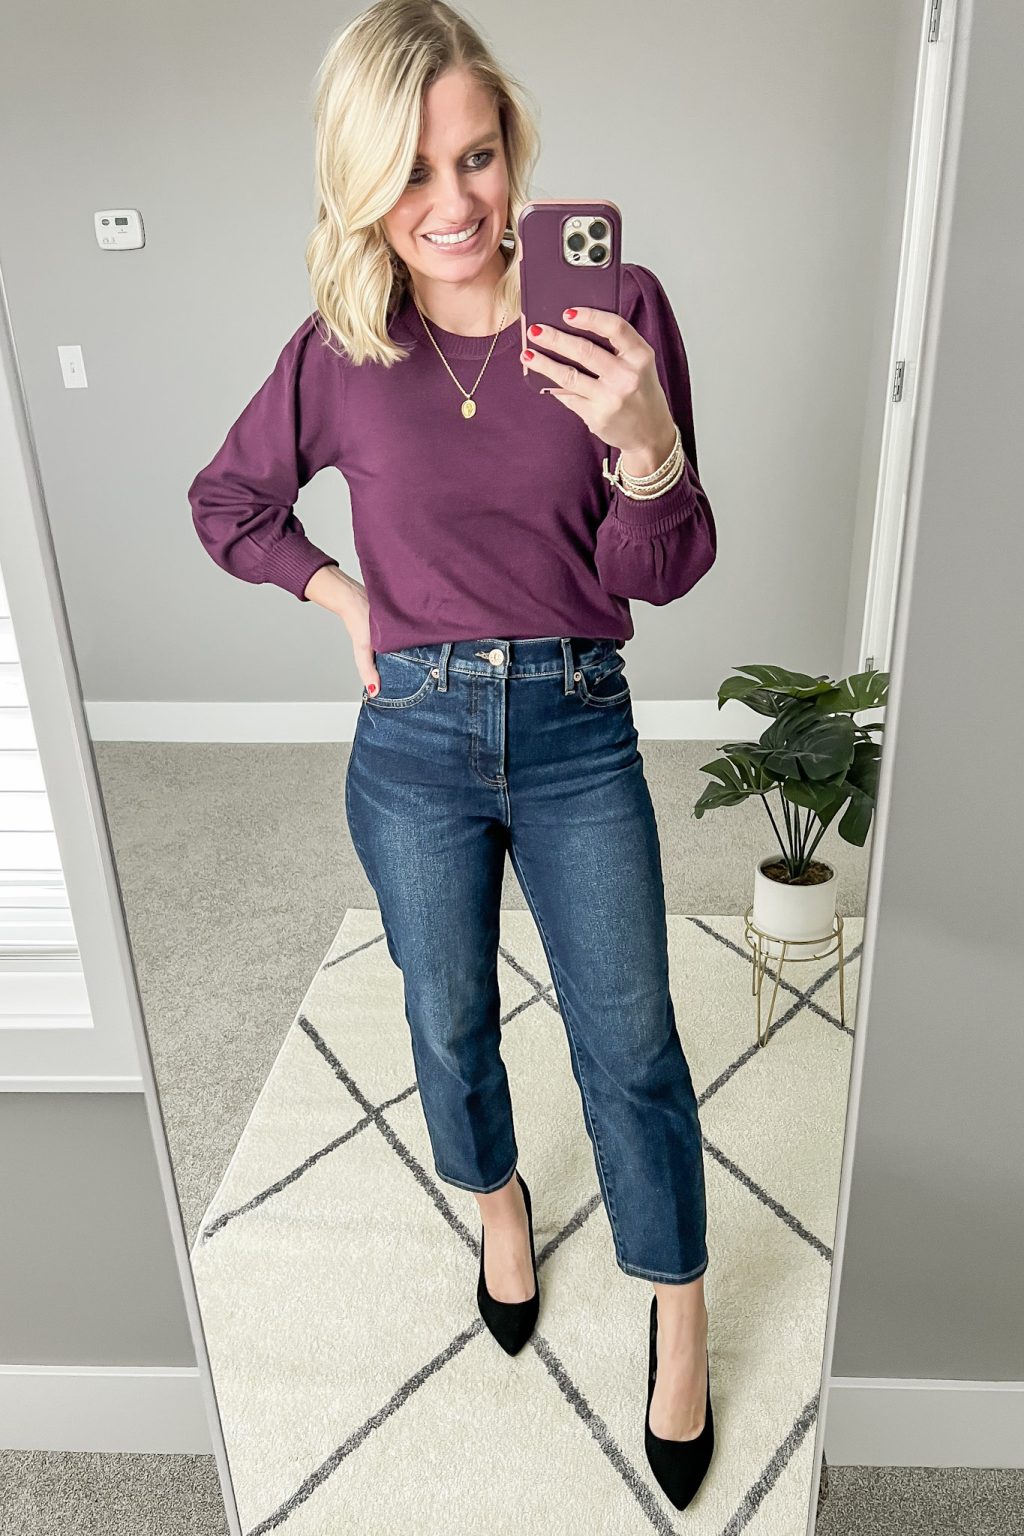 Where I Buy The Best Petite Jeans - Thrifty Wife Happy Life